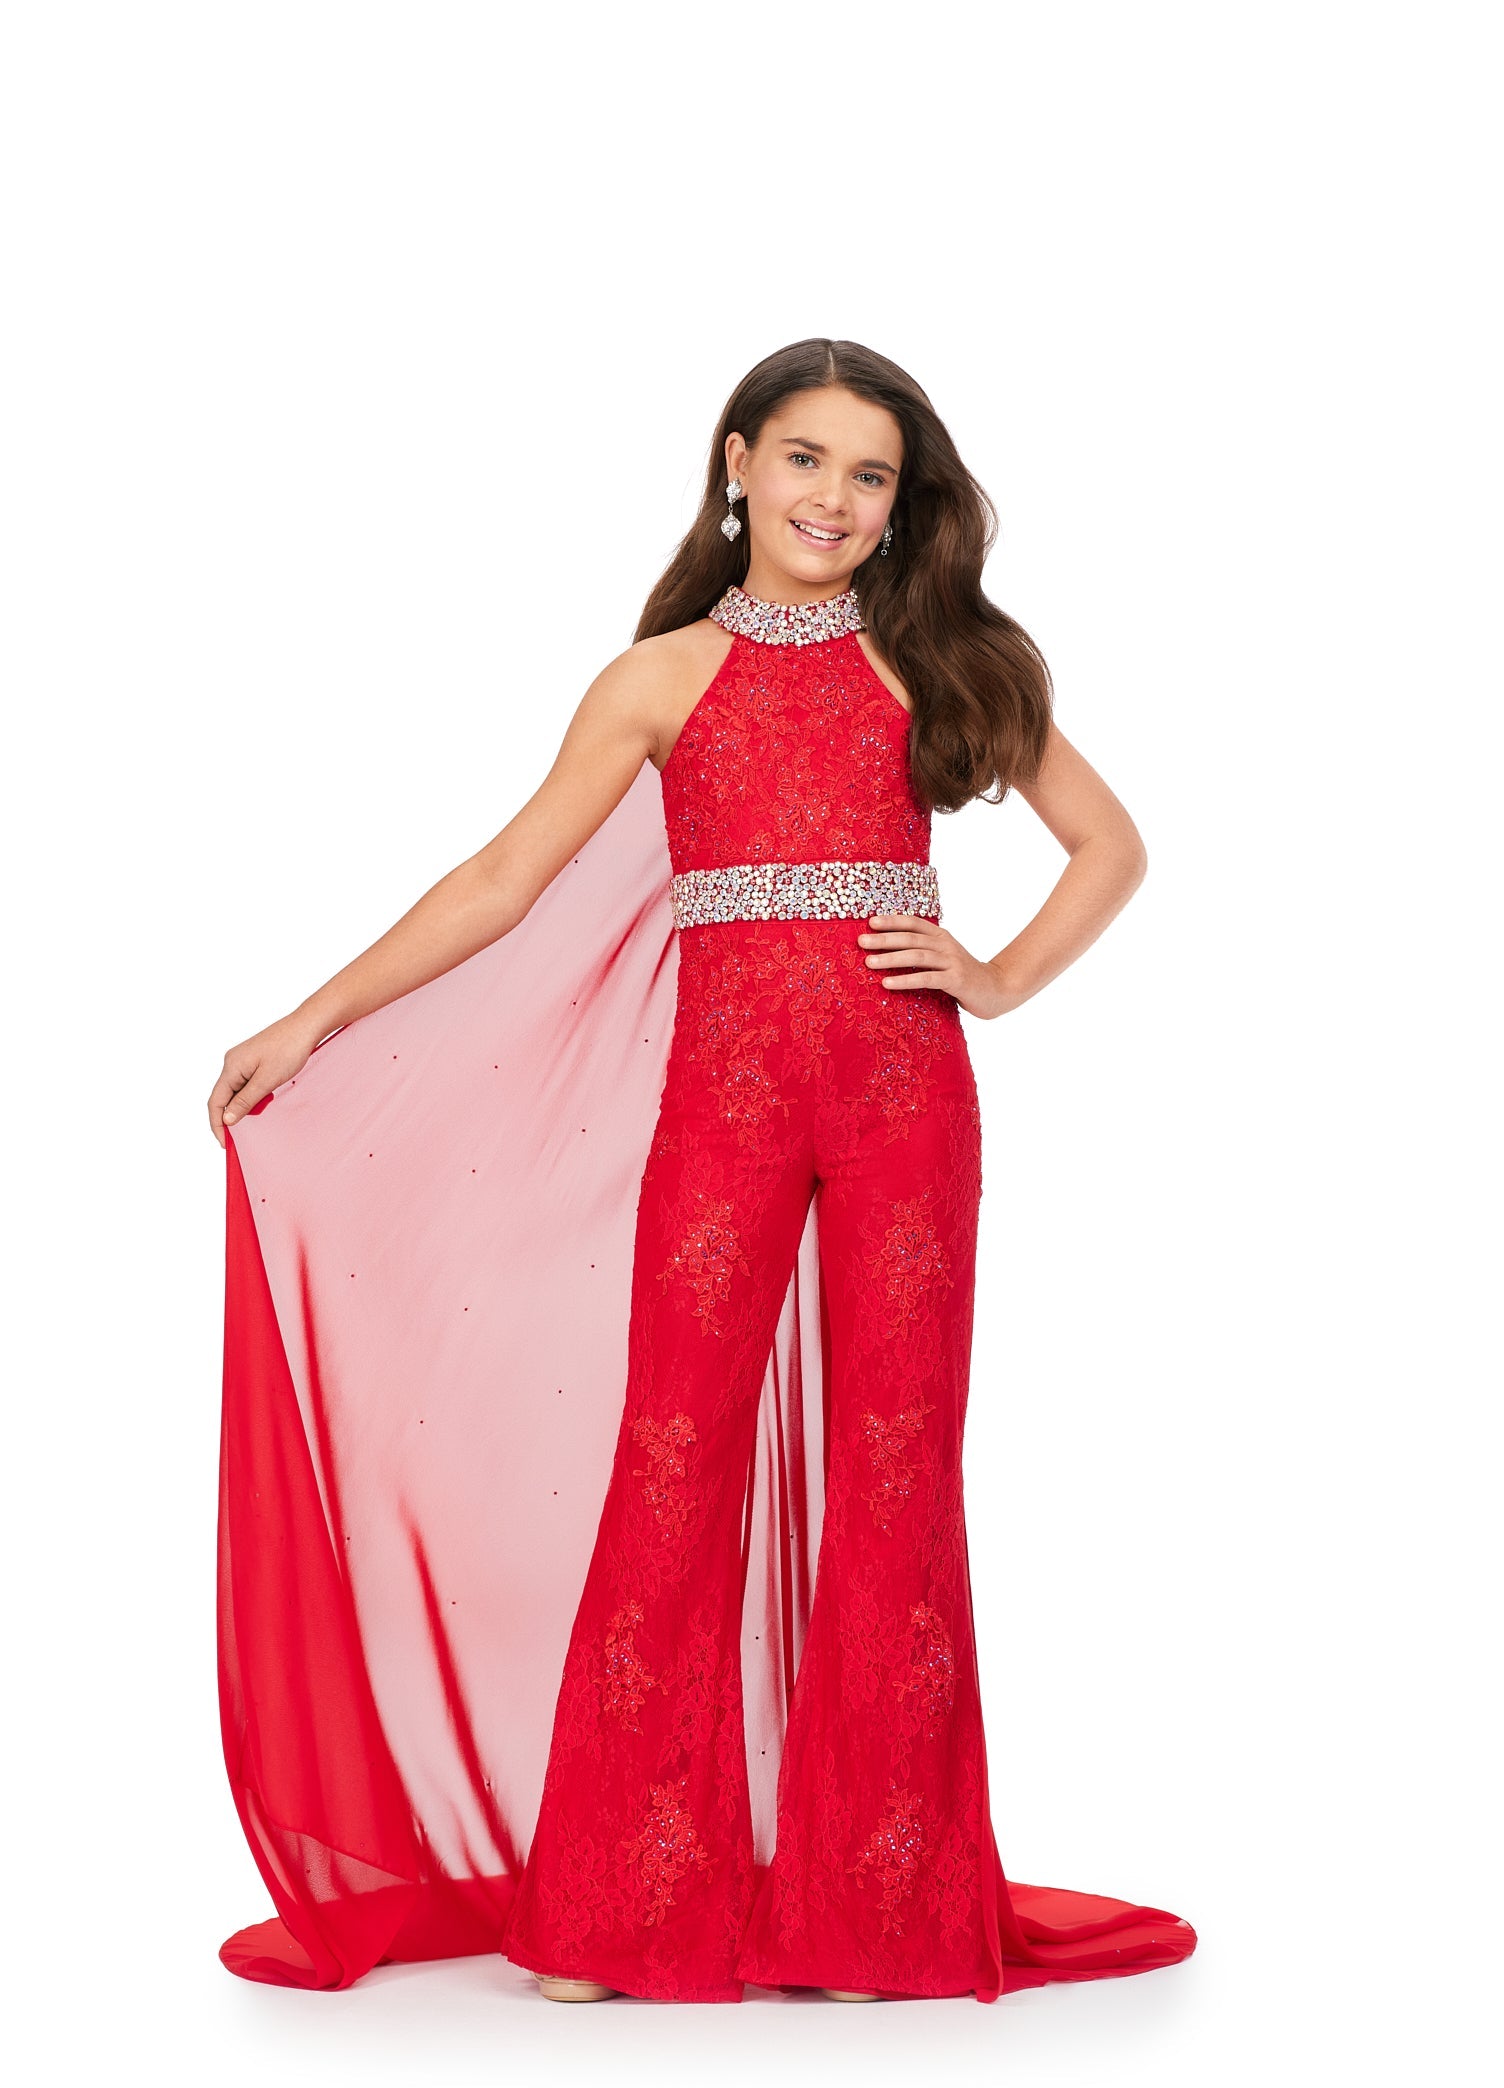 This Ashley Lauren Kids 8225 Girls Lace Crystal Jumpsuit Cape Bell Bottom Pageant Fun Fashion Wear is the perfect way to show off your sense of style. Its exquisite halter neckline and beaded accents make it a truly eye-catching piece. The chiffon cape and flare pant legs add a dramatic element and the jeweled belt and choker provide a touch of sparkle. Make a bold fashion statement with this beautiful jumpsuit!  Sizes: 4-16  Colors: Blue, Pink, Red